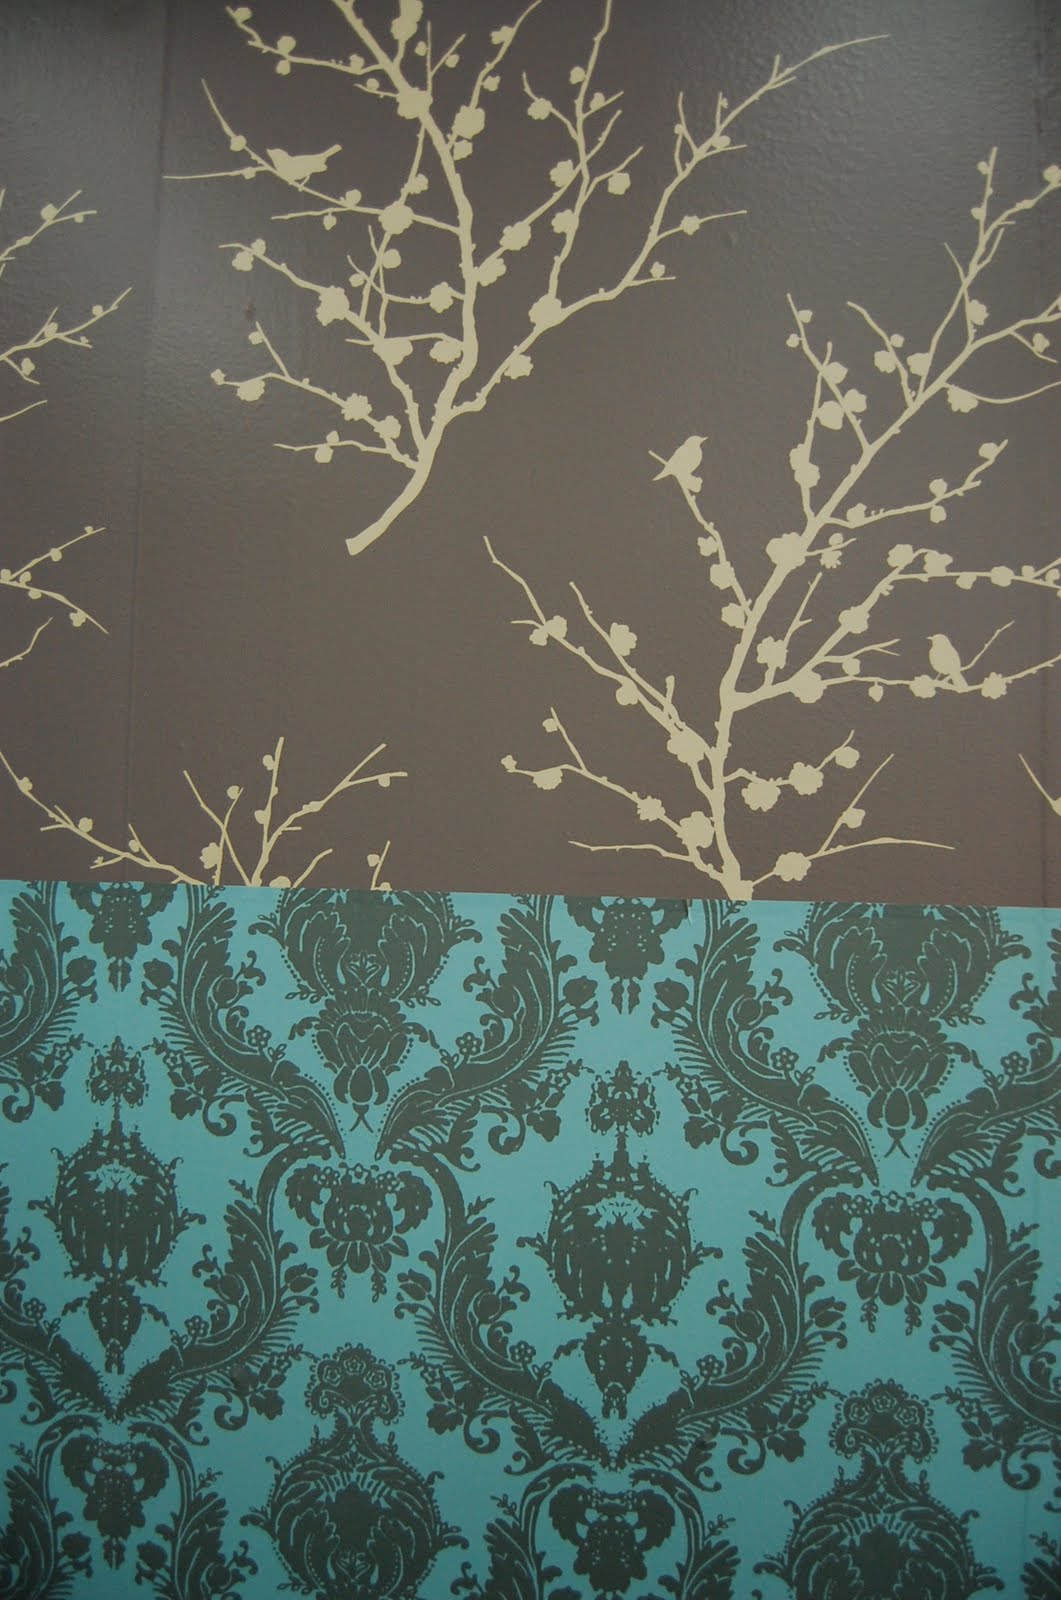 Tempaper is temporary wallpaper that is self adhesive and repositionable.